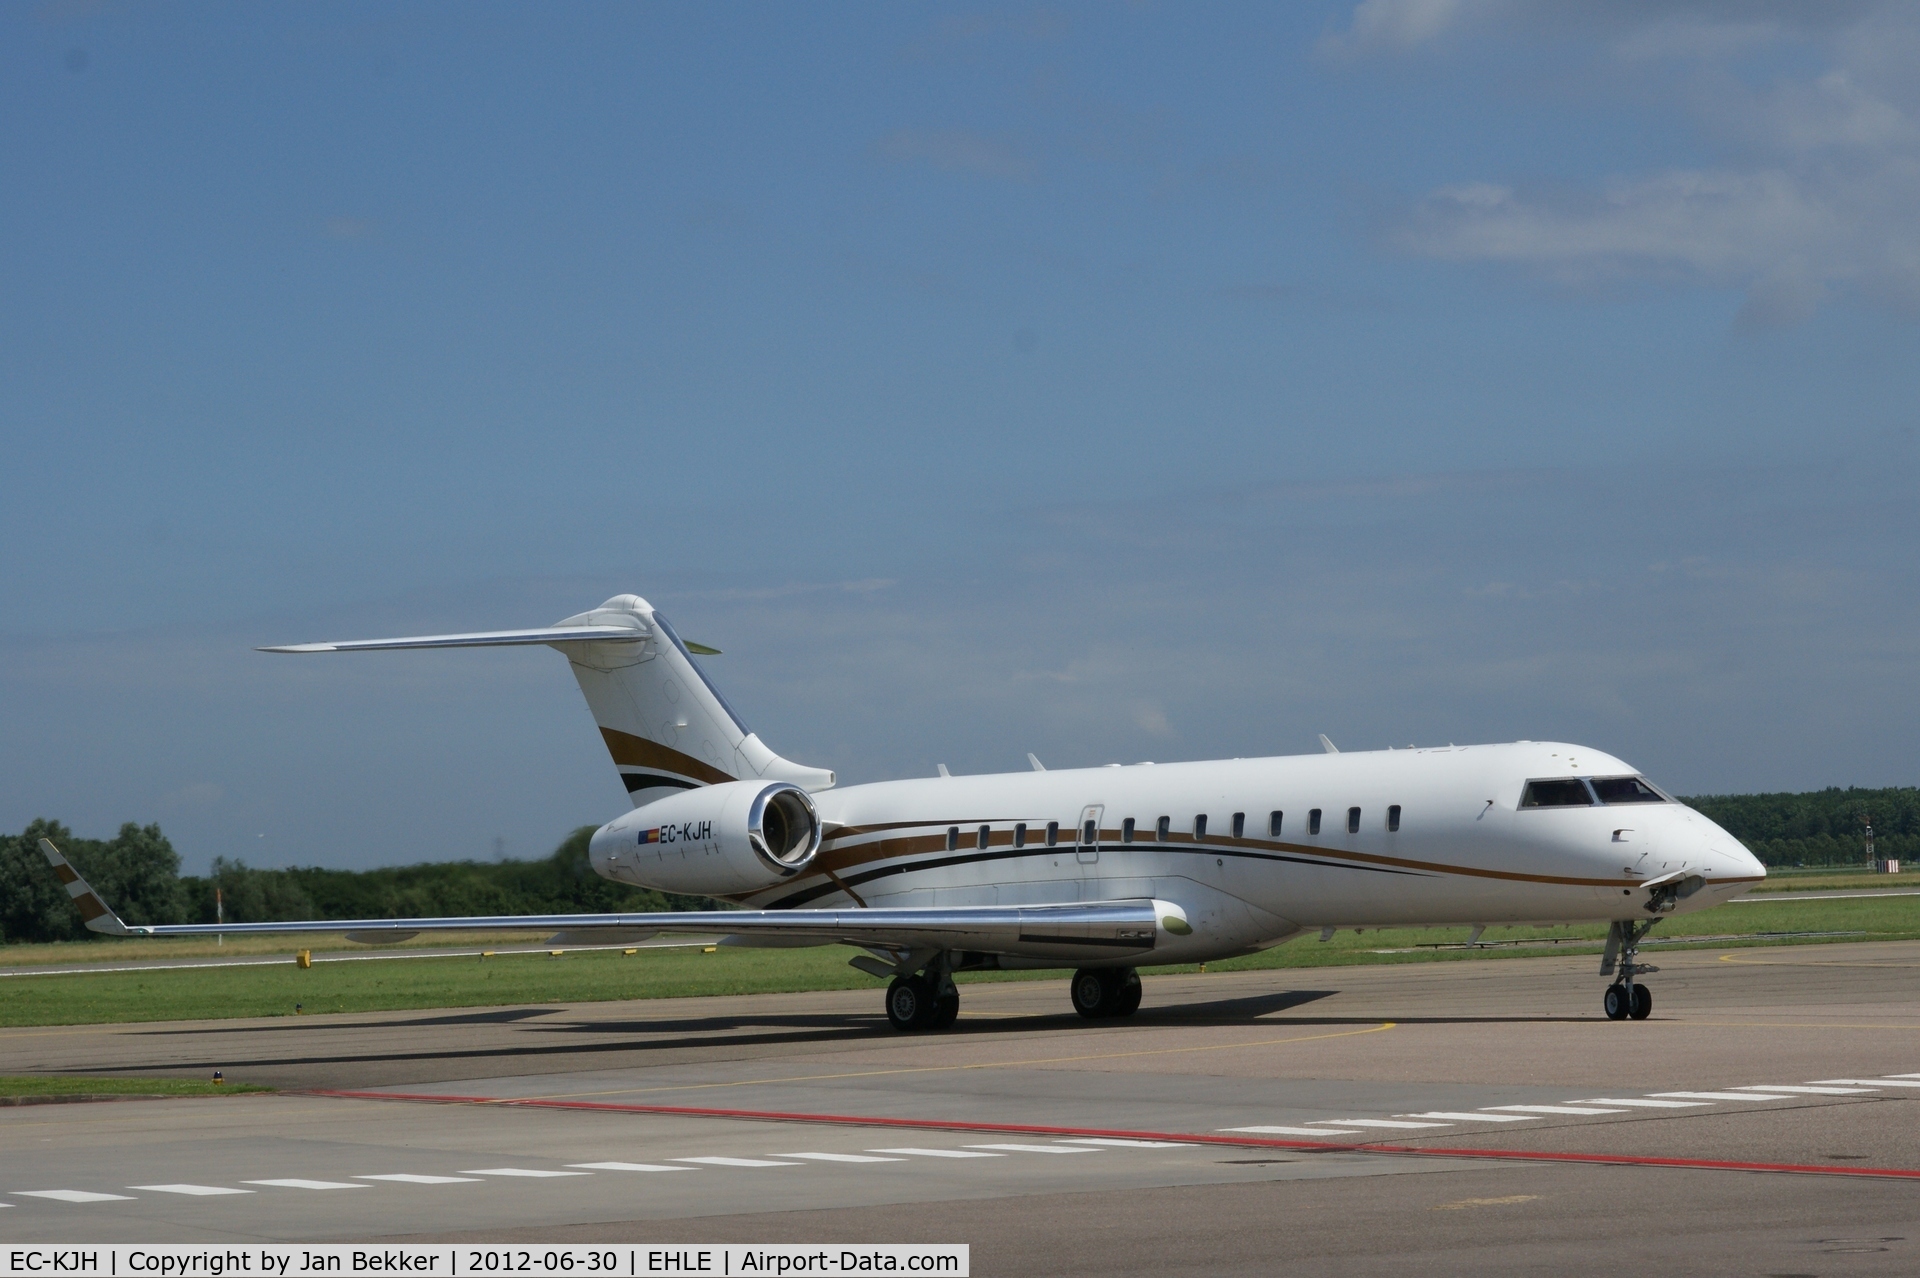 EC-KJH, 2001 Bombardier BD-700-1A10 Global Express C/N 9094, Arriving at lelystad Airport to get a new livery by QAPS